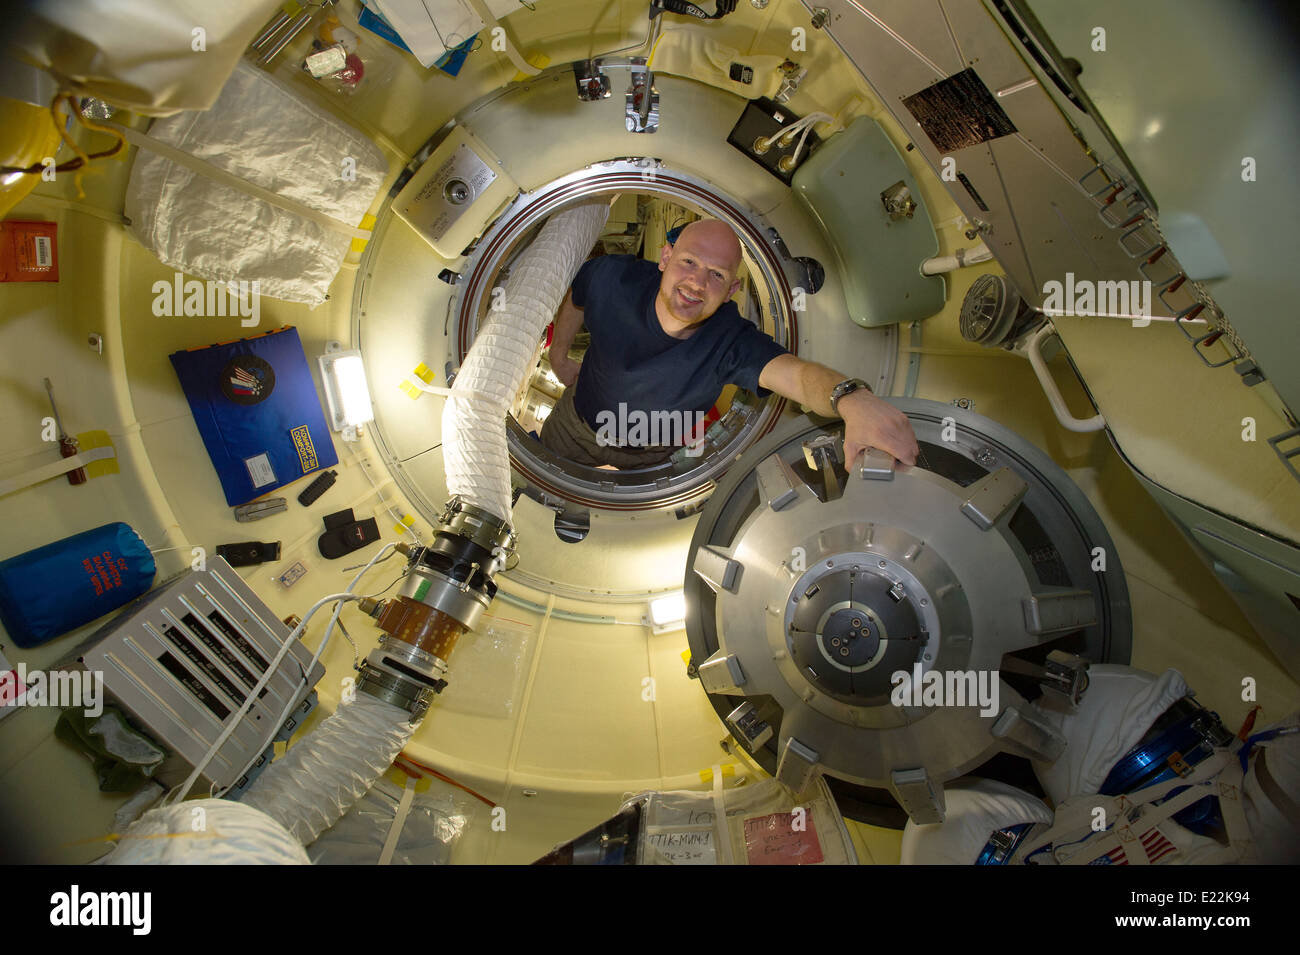 European Space Agency astronaut Alexander Gerst, Expedition 40 flight engineer, in the Rassvet Mini-Research Module 1 hatch of the International Space Station June 6, 2014. Stock Photo